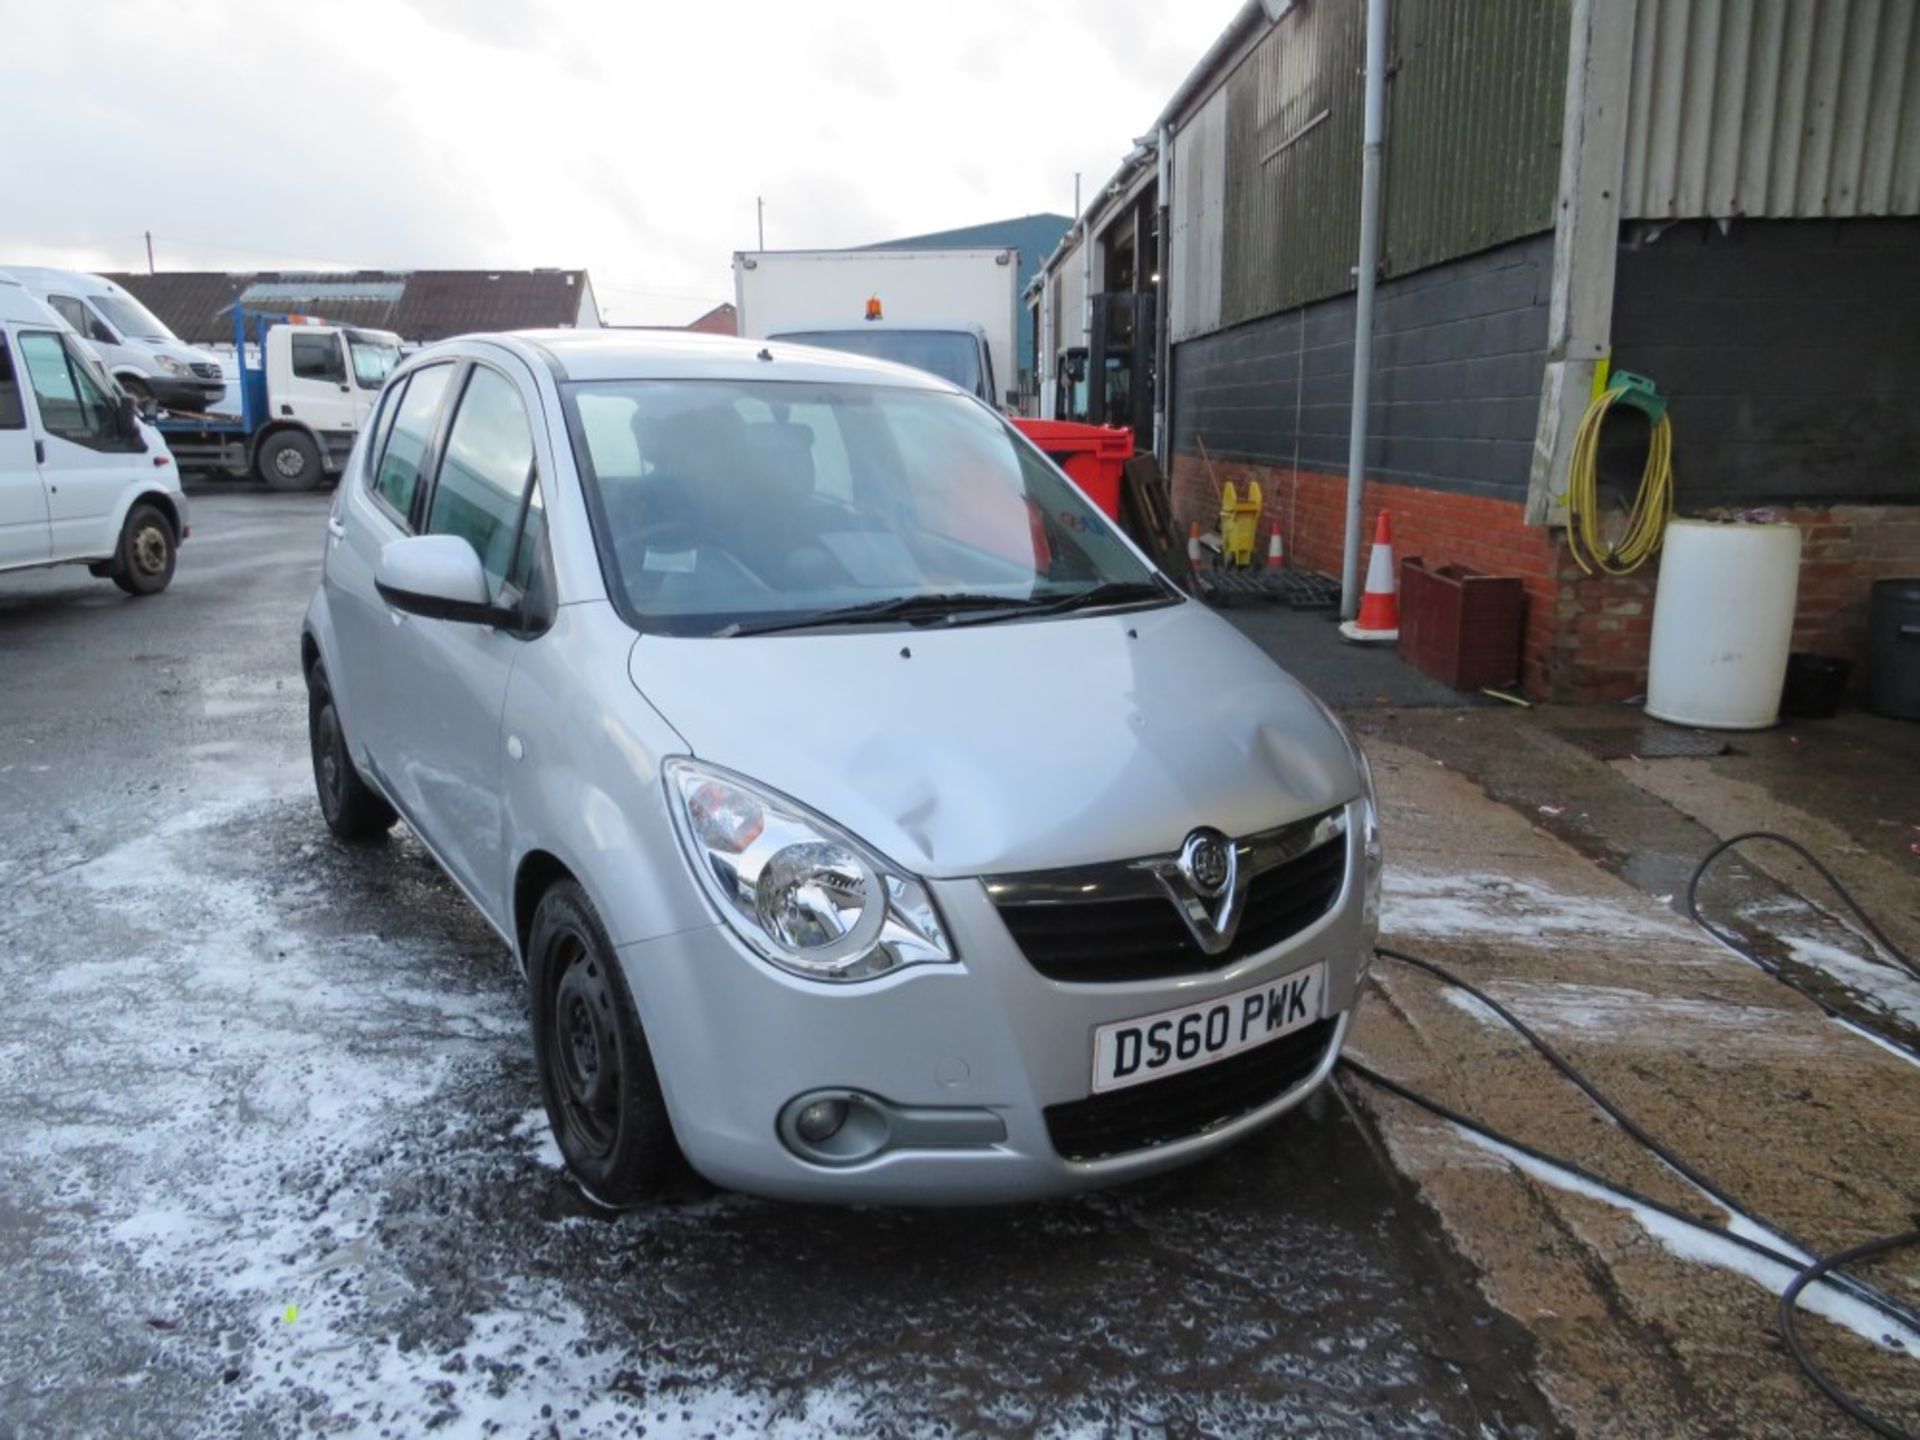 60 reg VAUXHALL AGILA S ECOFLEX (DIRECT COUNCIL) 1ST REG 12/10, 96993M, V5 HERE, 1 OWNER FROM NEW [